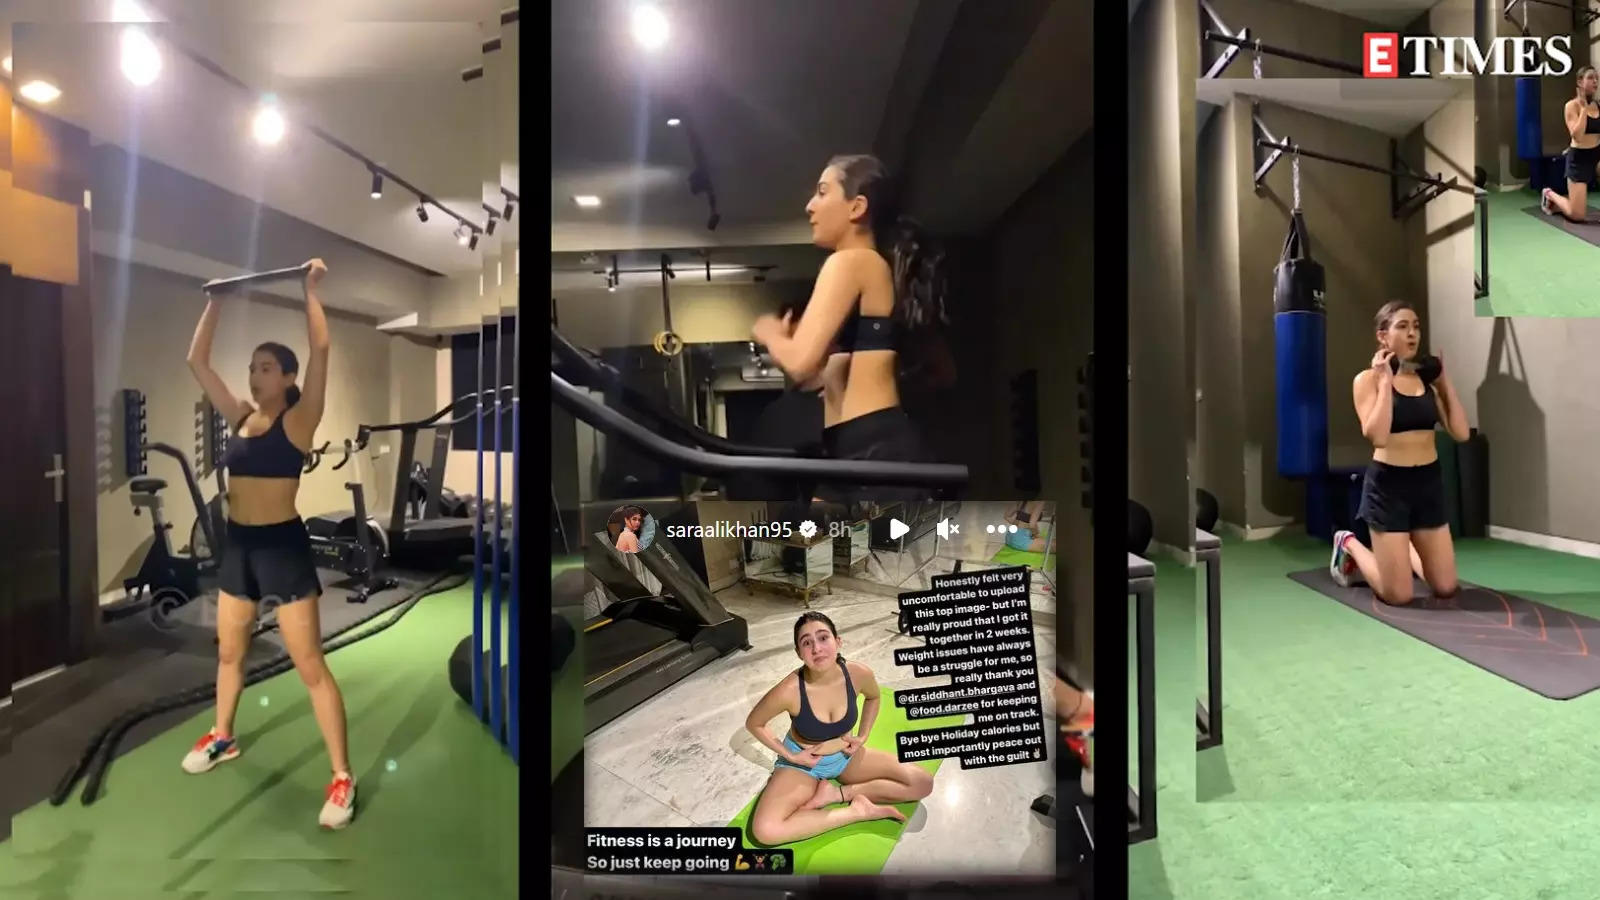 Sara worked out like a beast': Sara Ali Khan's fitness trainer Dr Siddhant  Bhargava reacts to actress' photo with belly fat picture